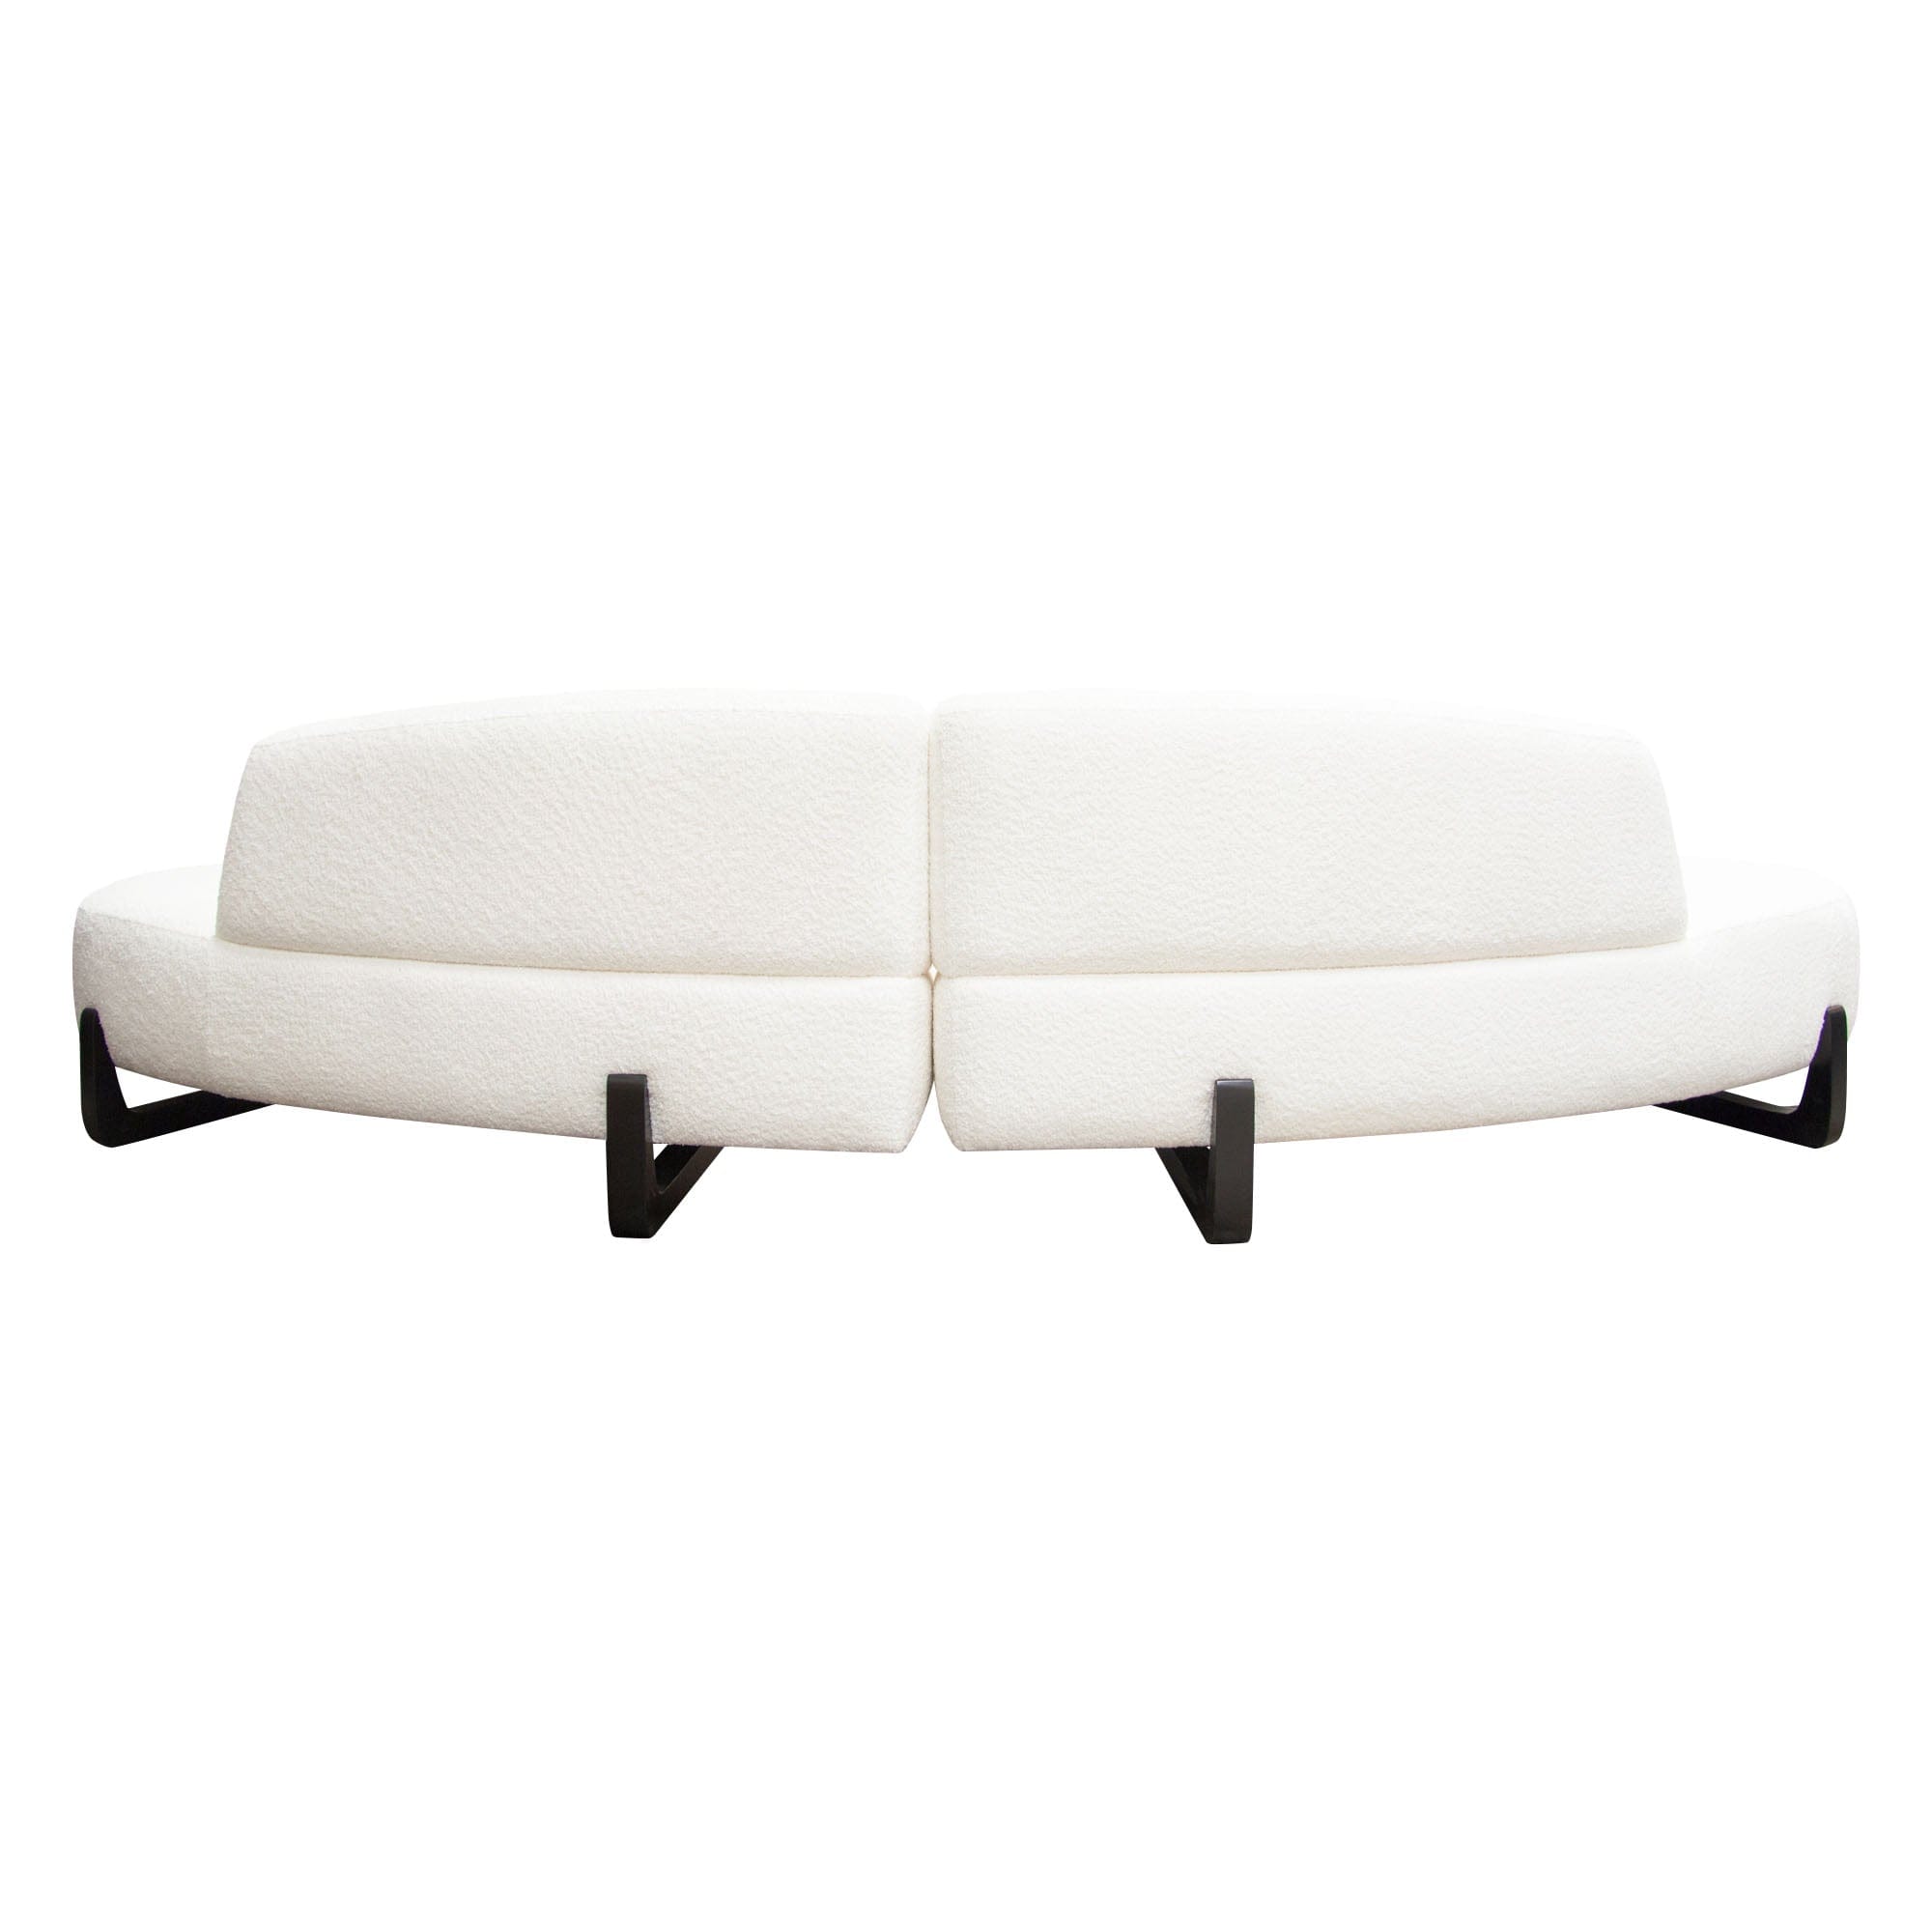 Sophisticated Curved Modular Sofa